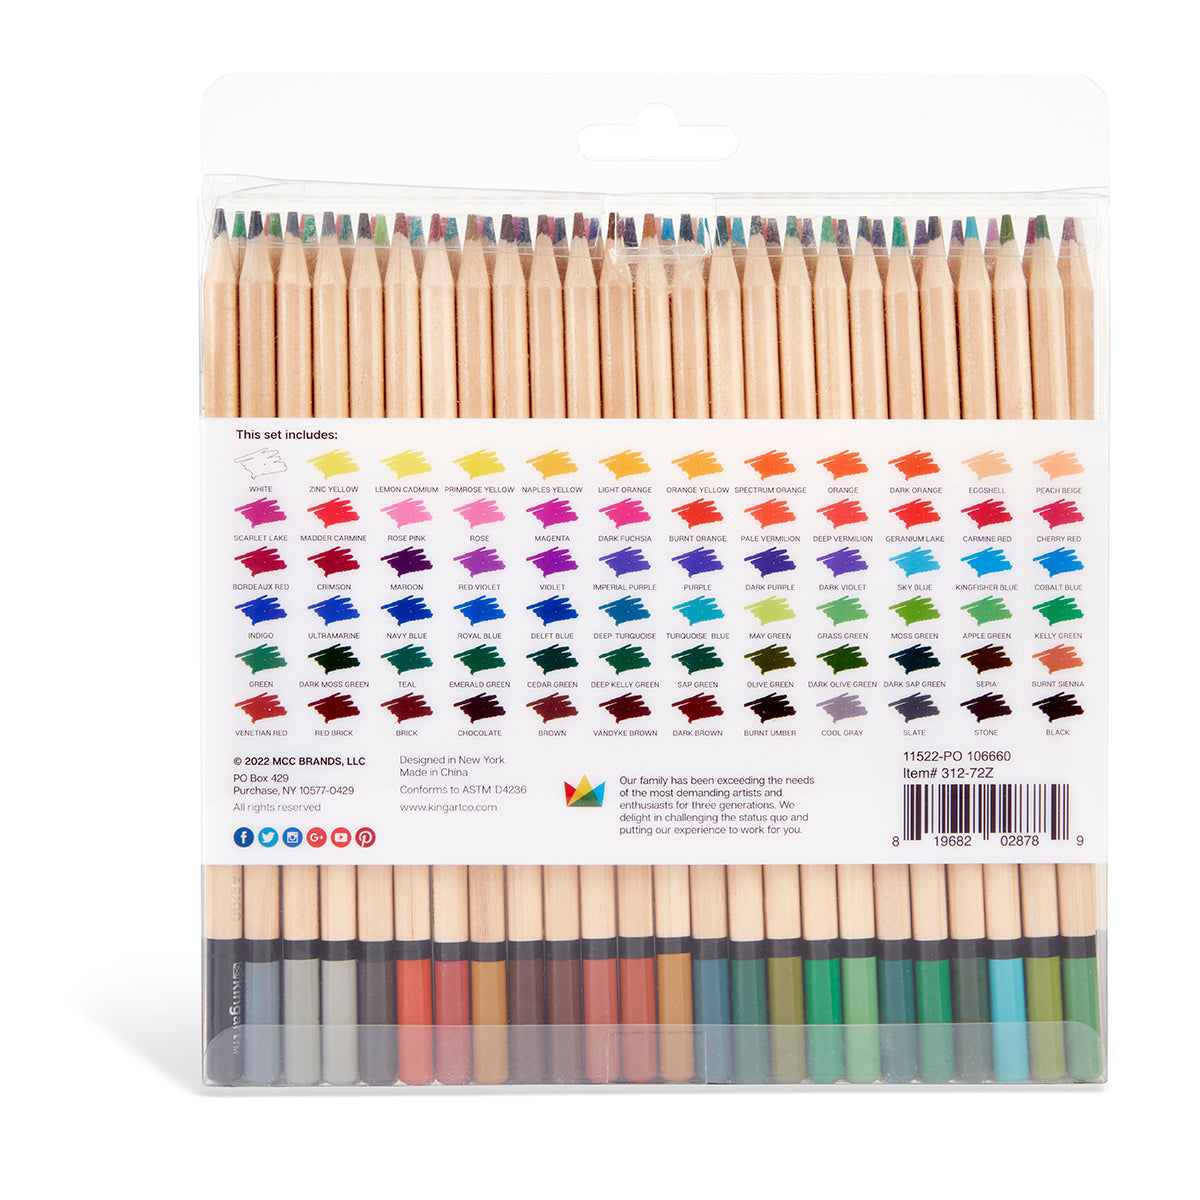 Drawing Sketching Pencils Set, 36 Packs Art Supplies Kit with Draw Sketch Pencils Dual Ended Color Pencil Charcoal Pencils, Canvas Pencil Wrap for